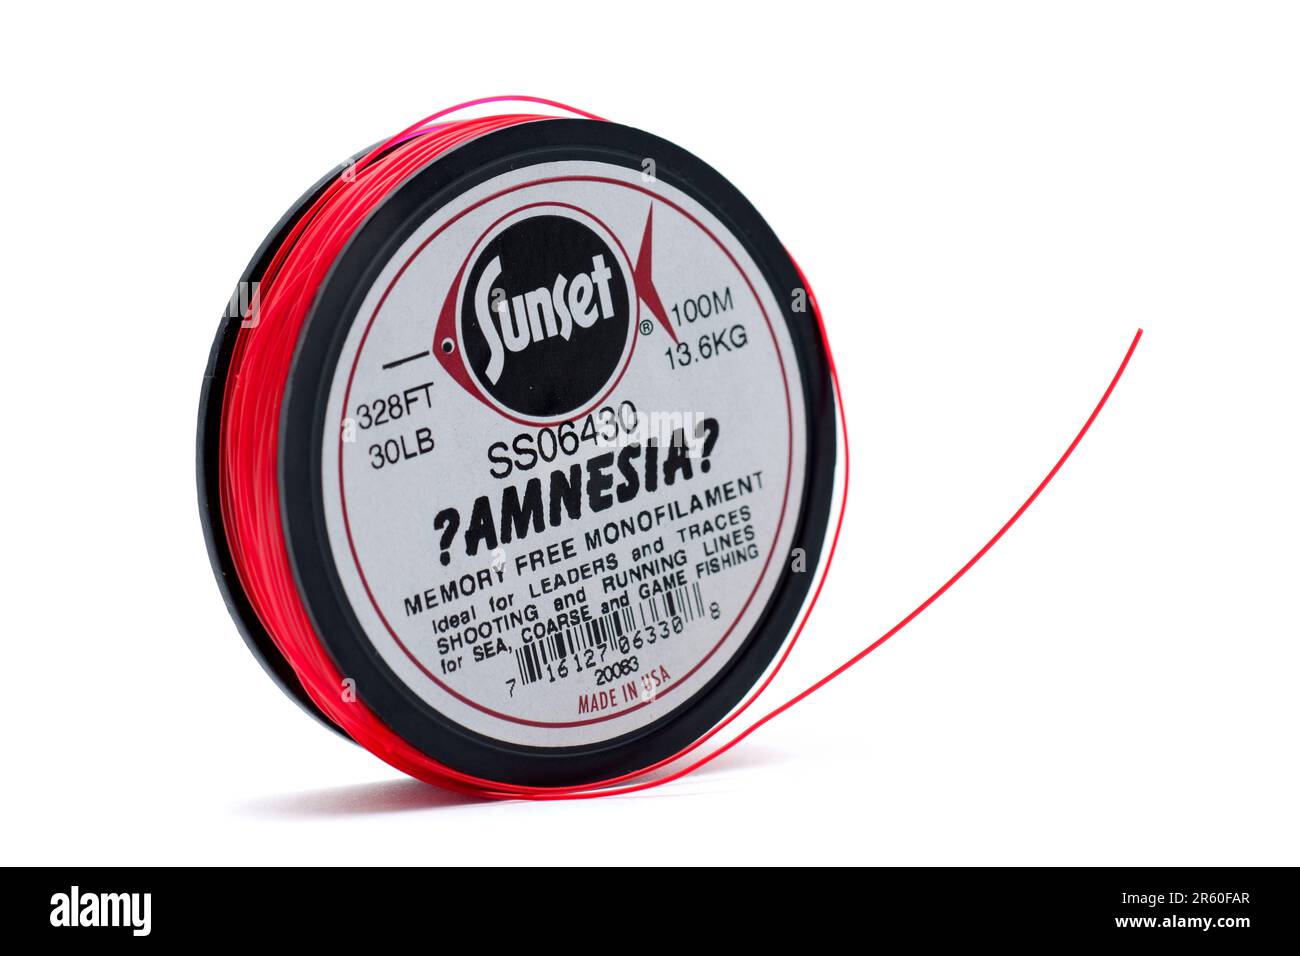 100 Meter Spool of Red Sunset Amnesia 13.6 kg Breaking Strain Memory Free Fishing  Line Monofilament made in the USA Stock Photo - Alamy